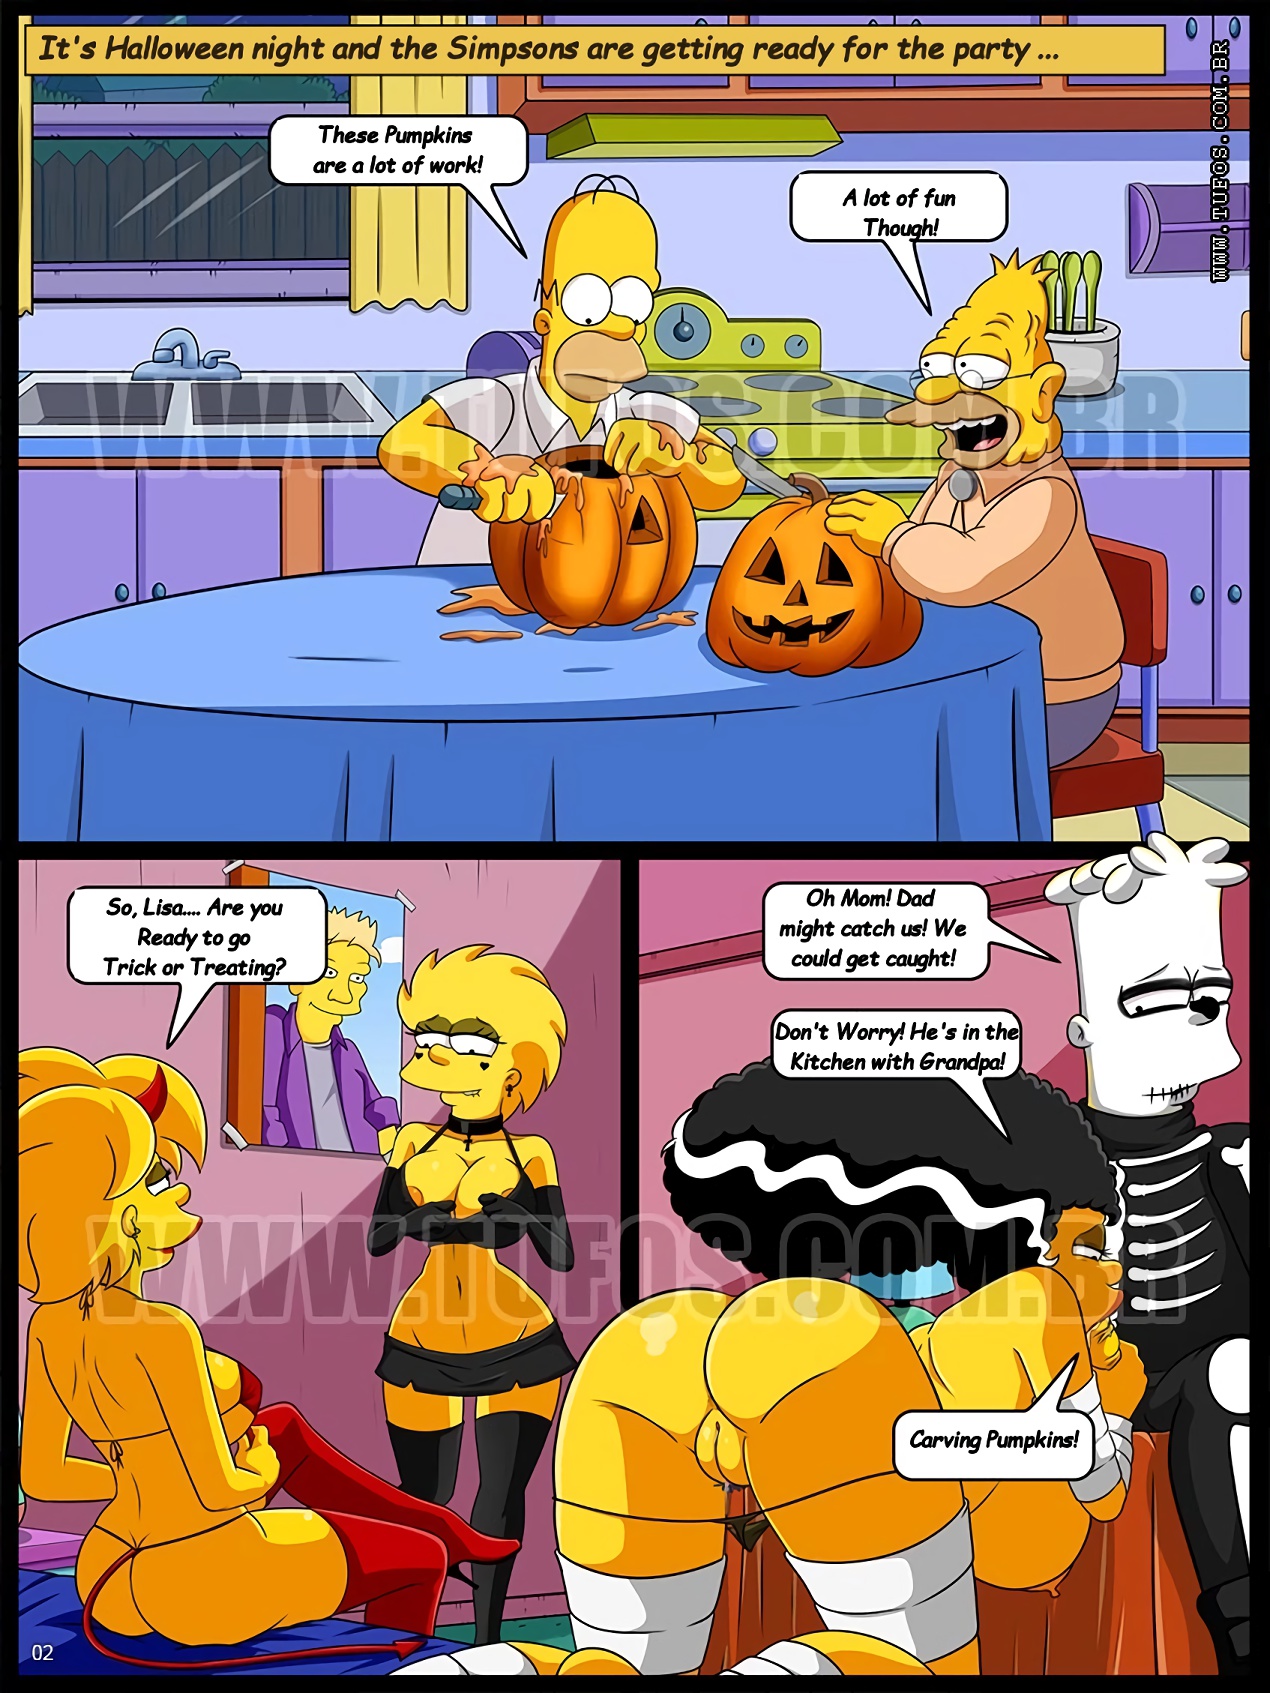 Porn with the simpsons comics